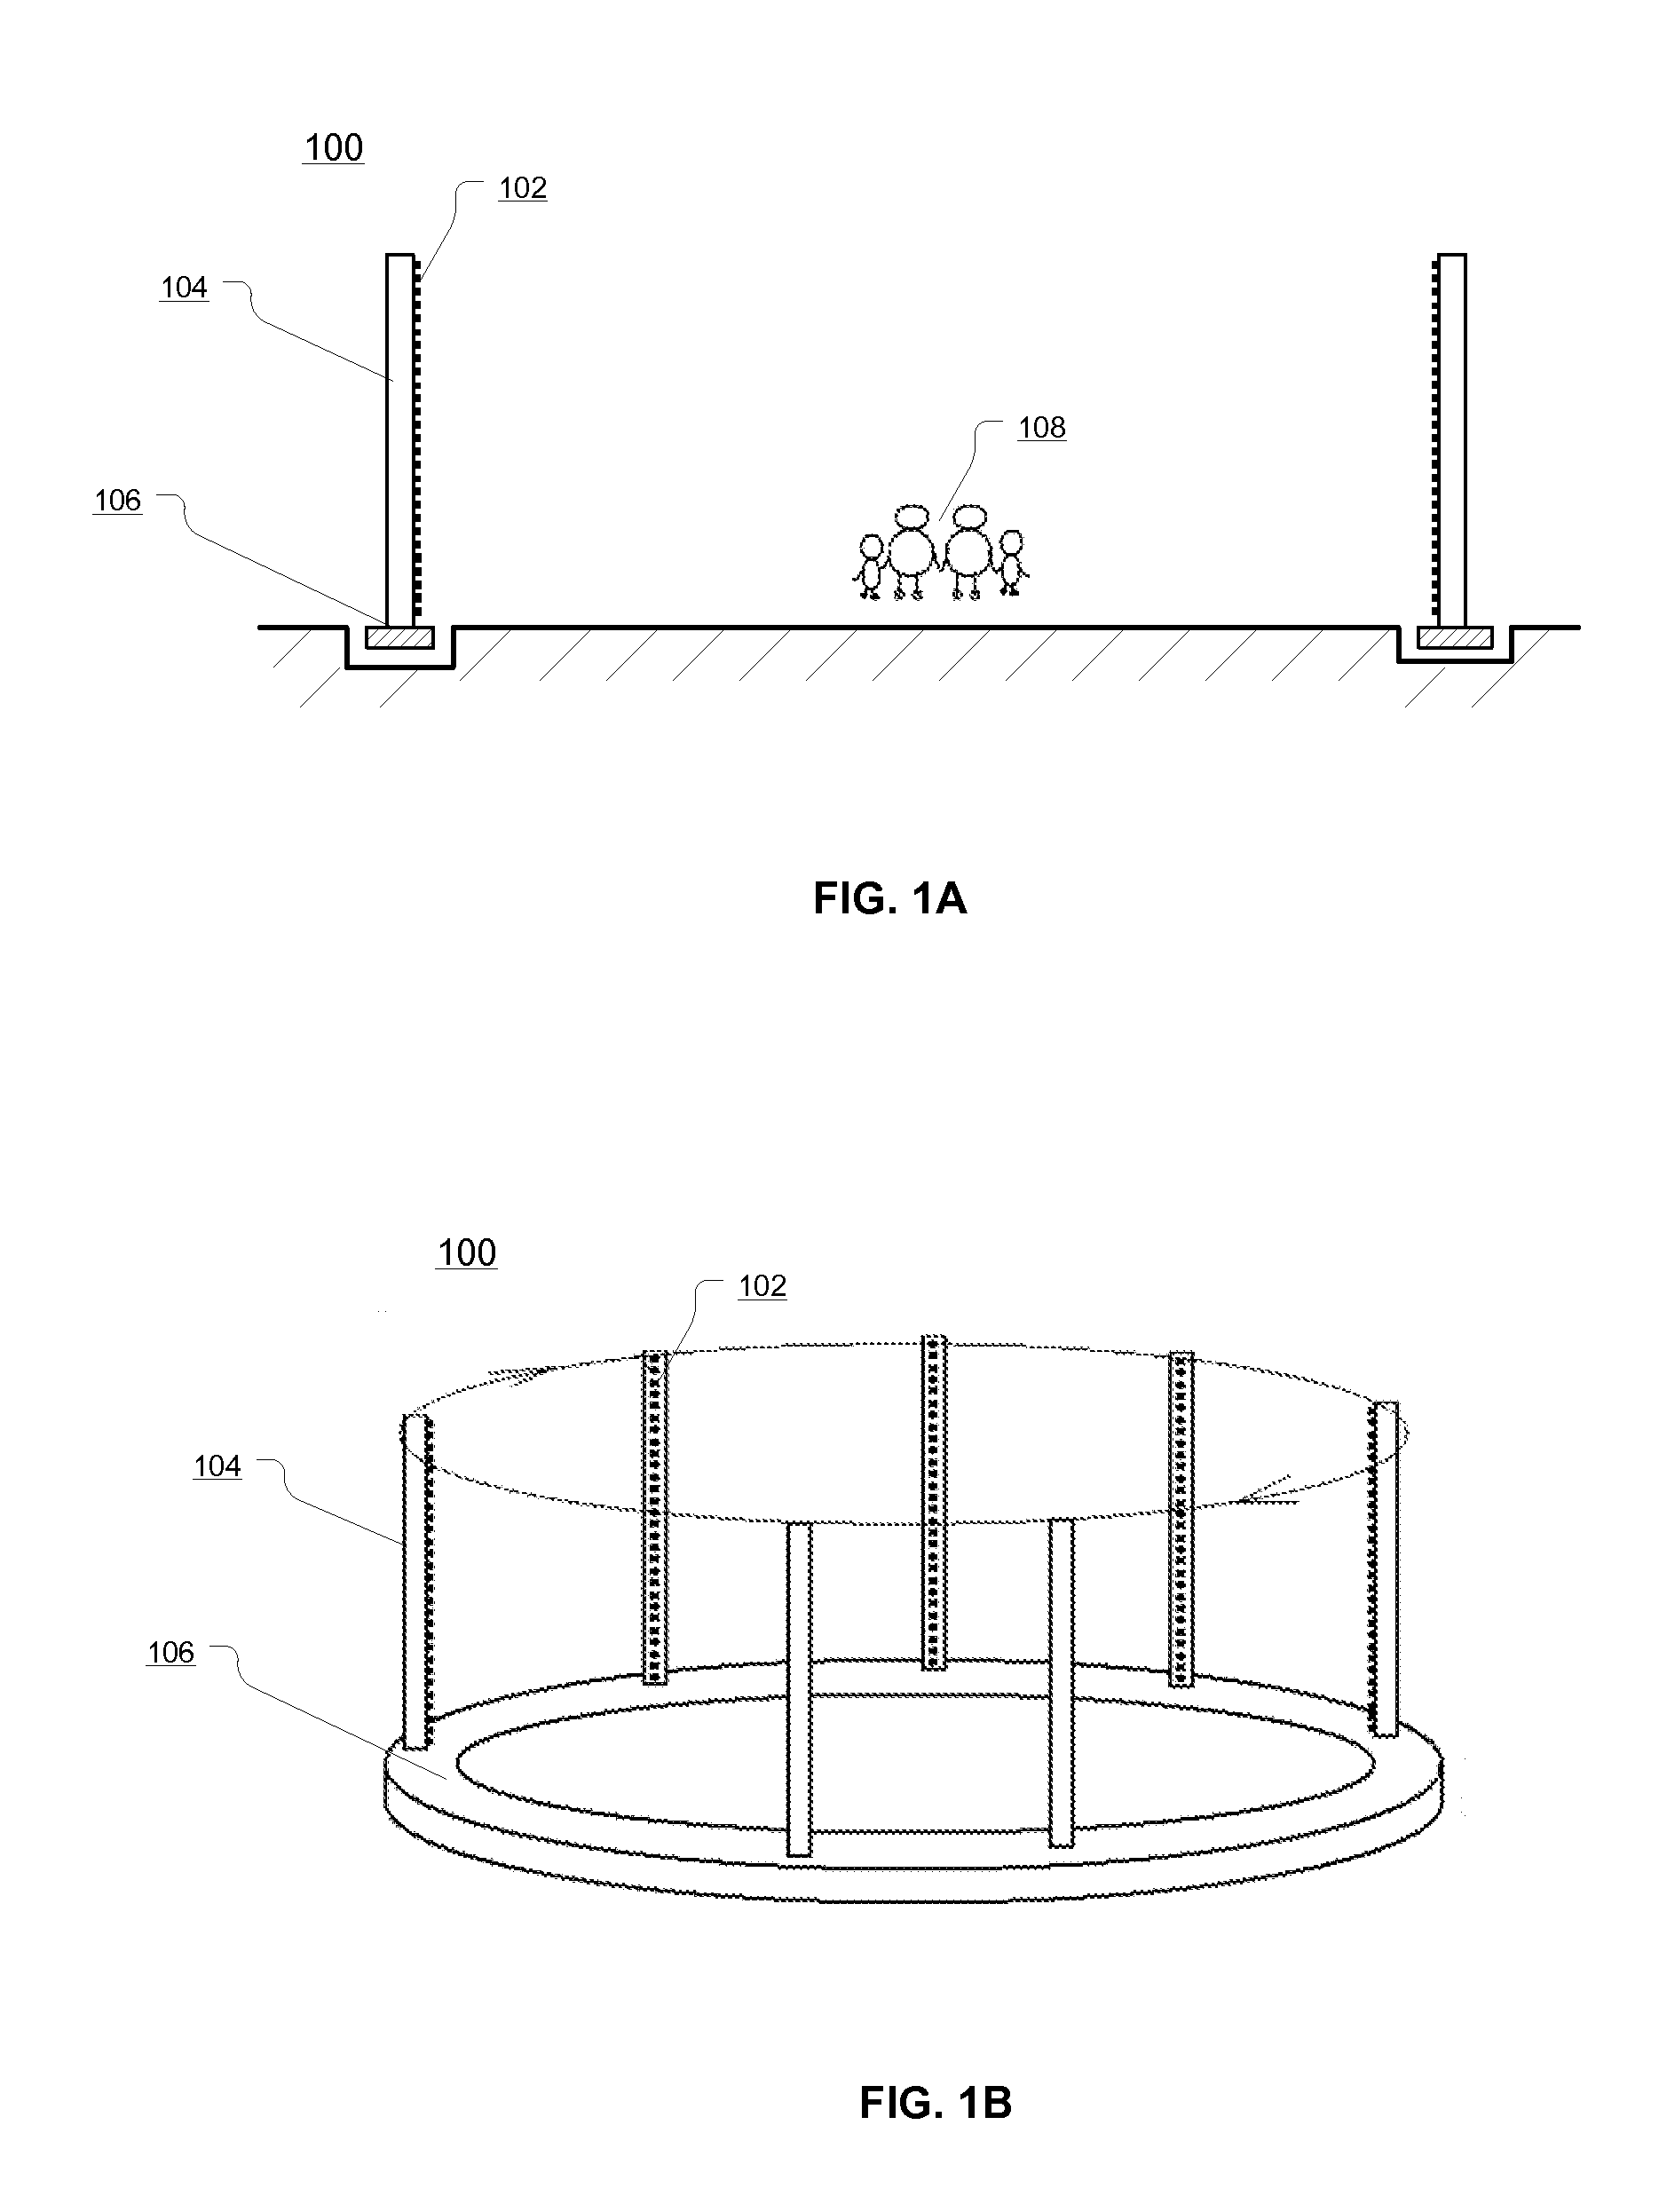 3D visual display system and method